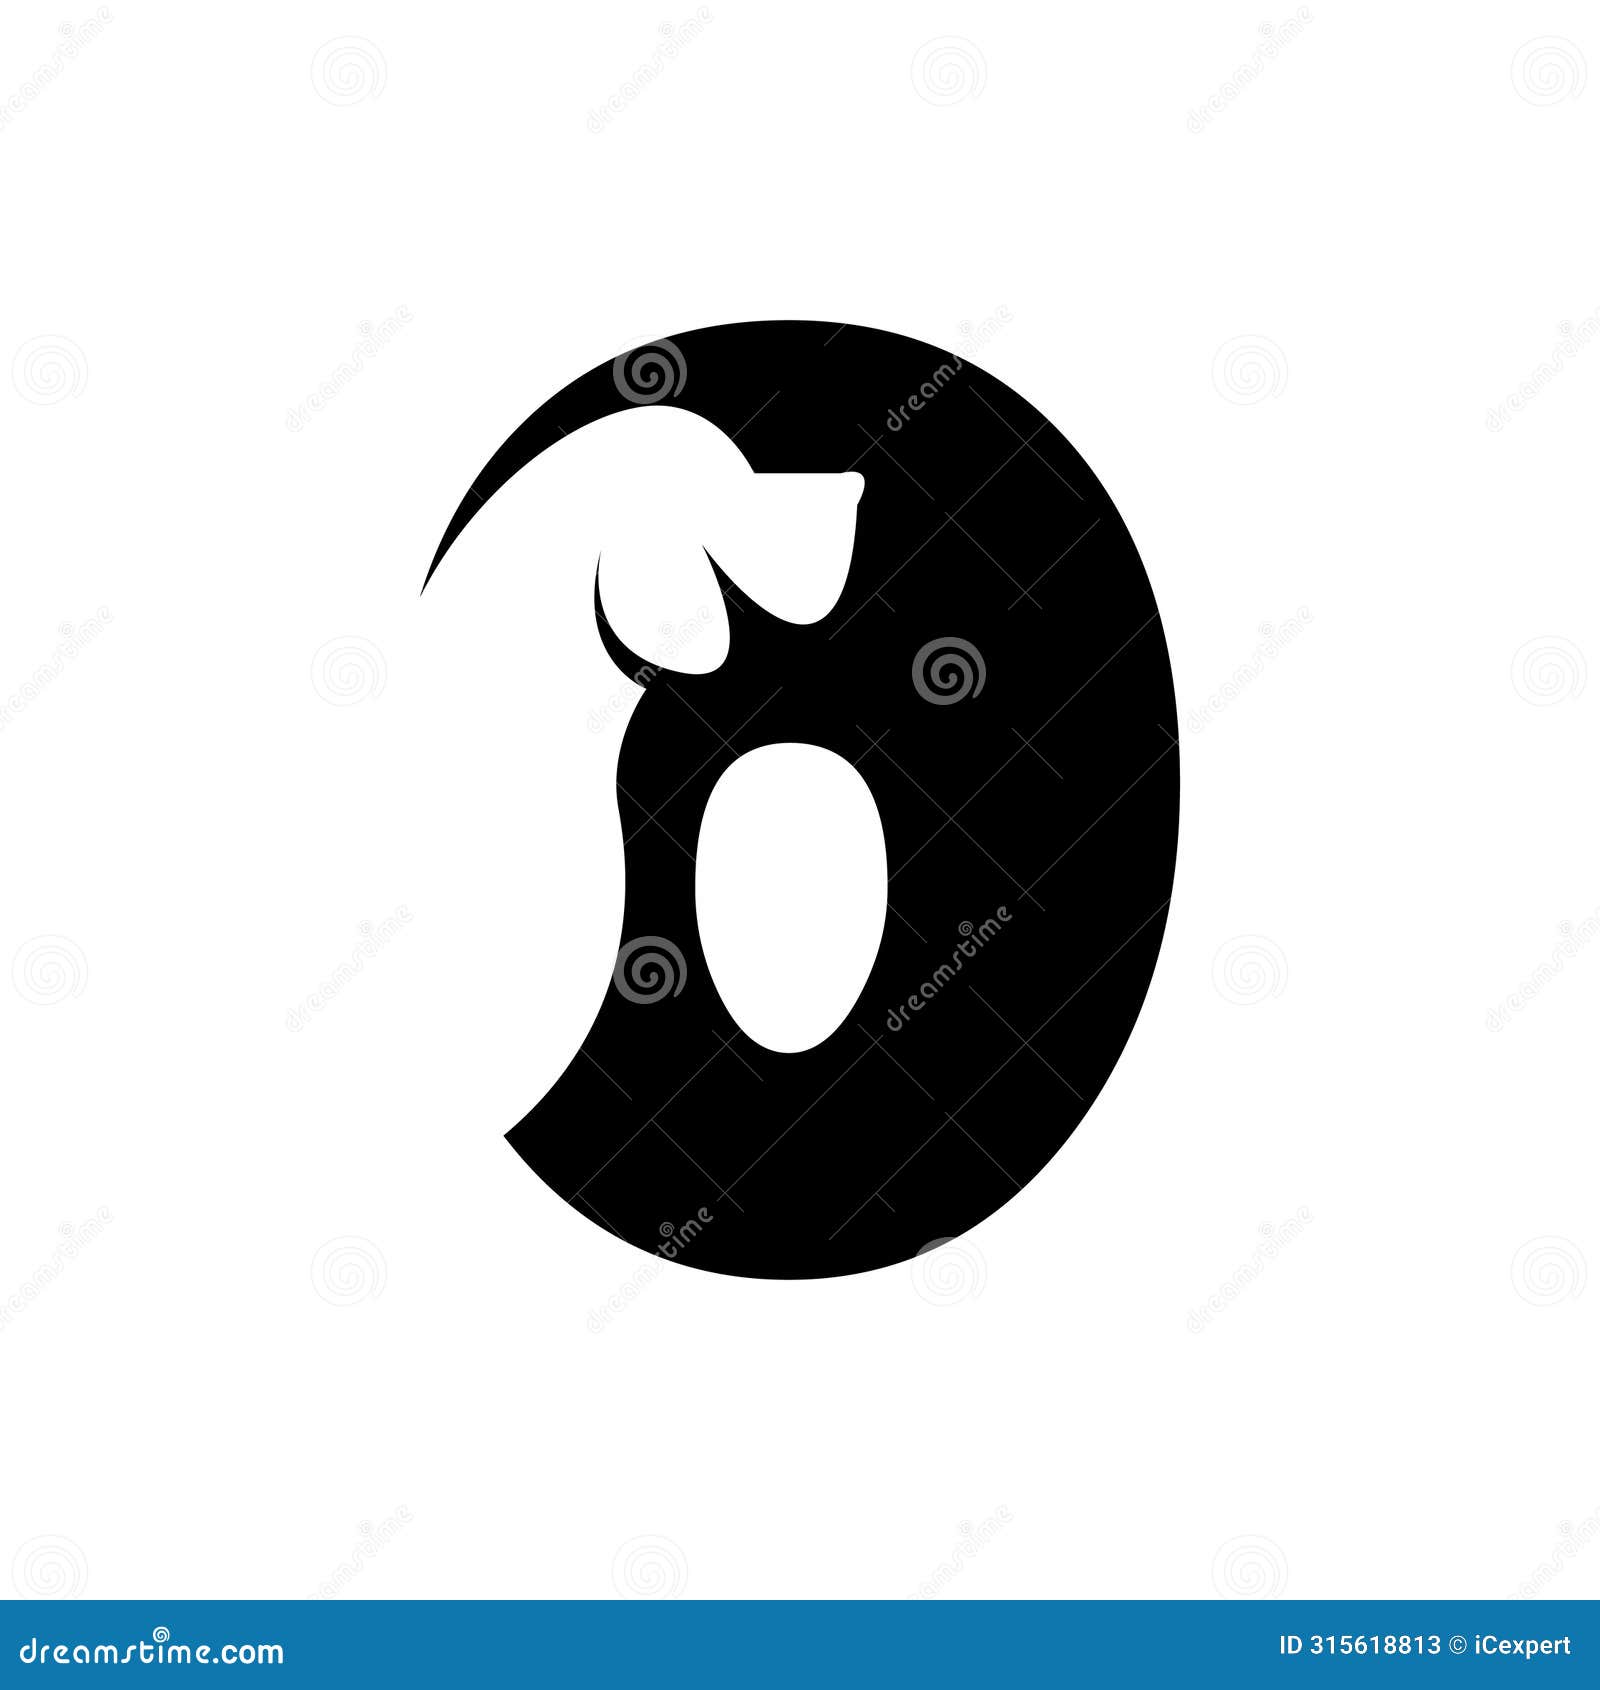 o letter with a negative space dog logo